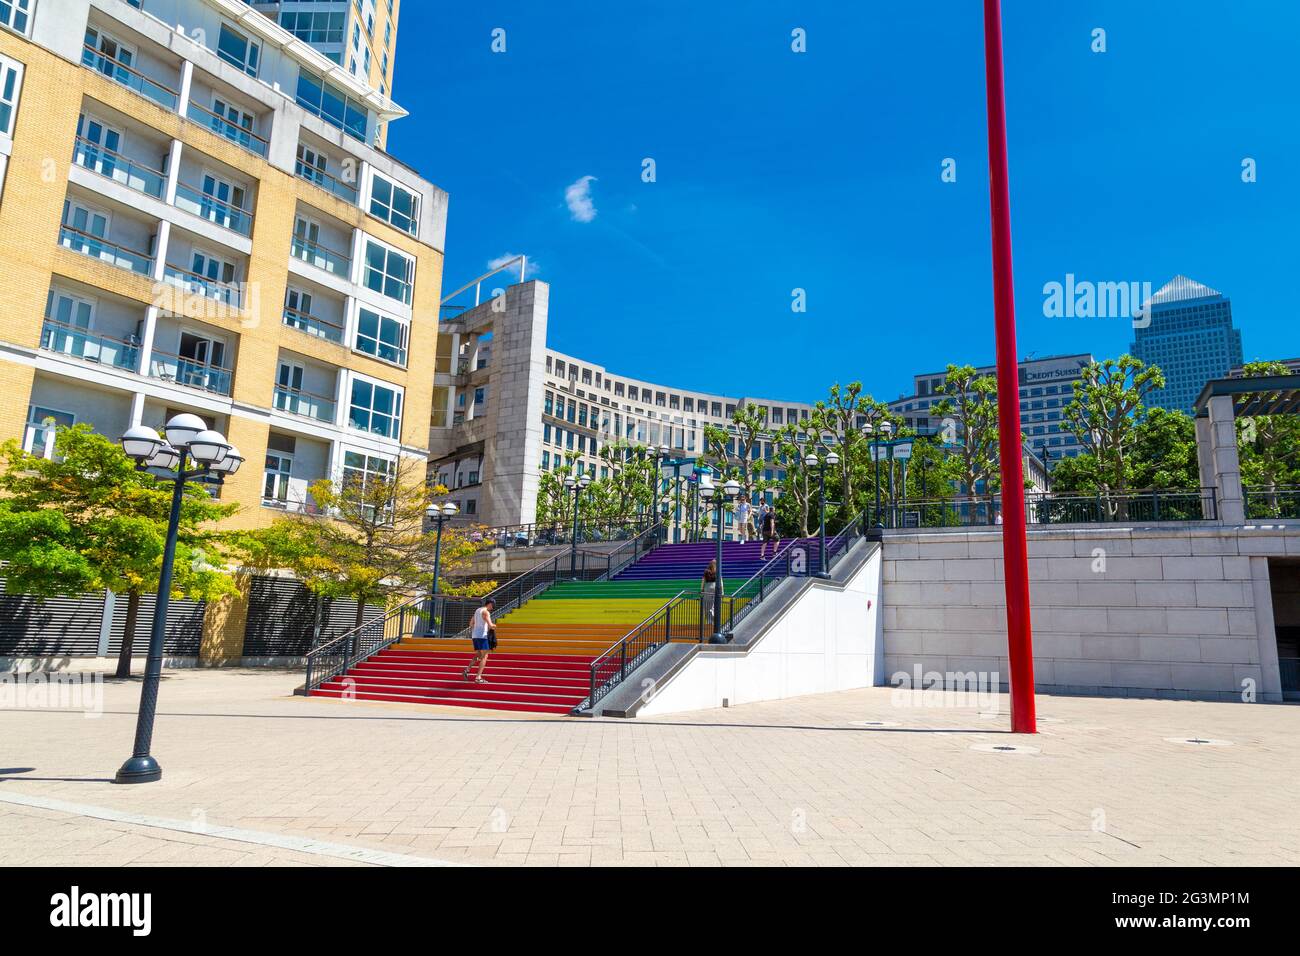 14 June 2021 - Stairs at Westferry Circus decorated with rainbow colours of the Pride flag for Pride Month, Canary Wharf, London, UK Stock Photo